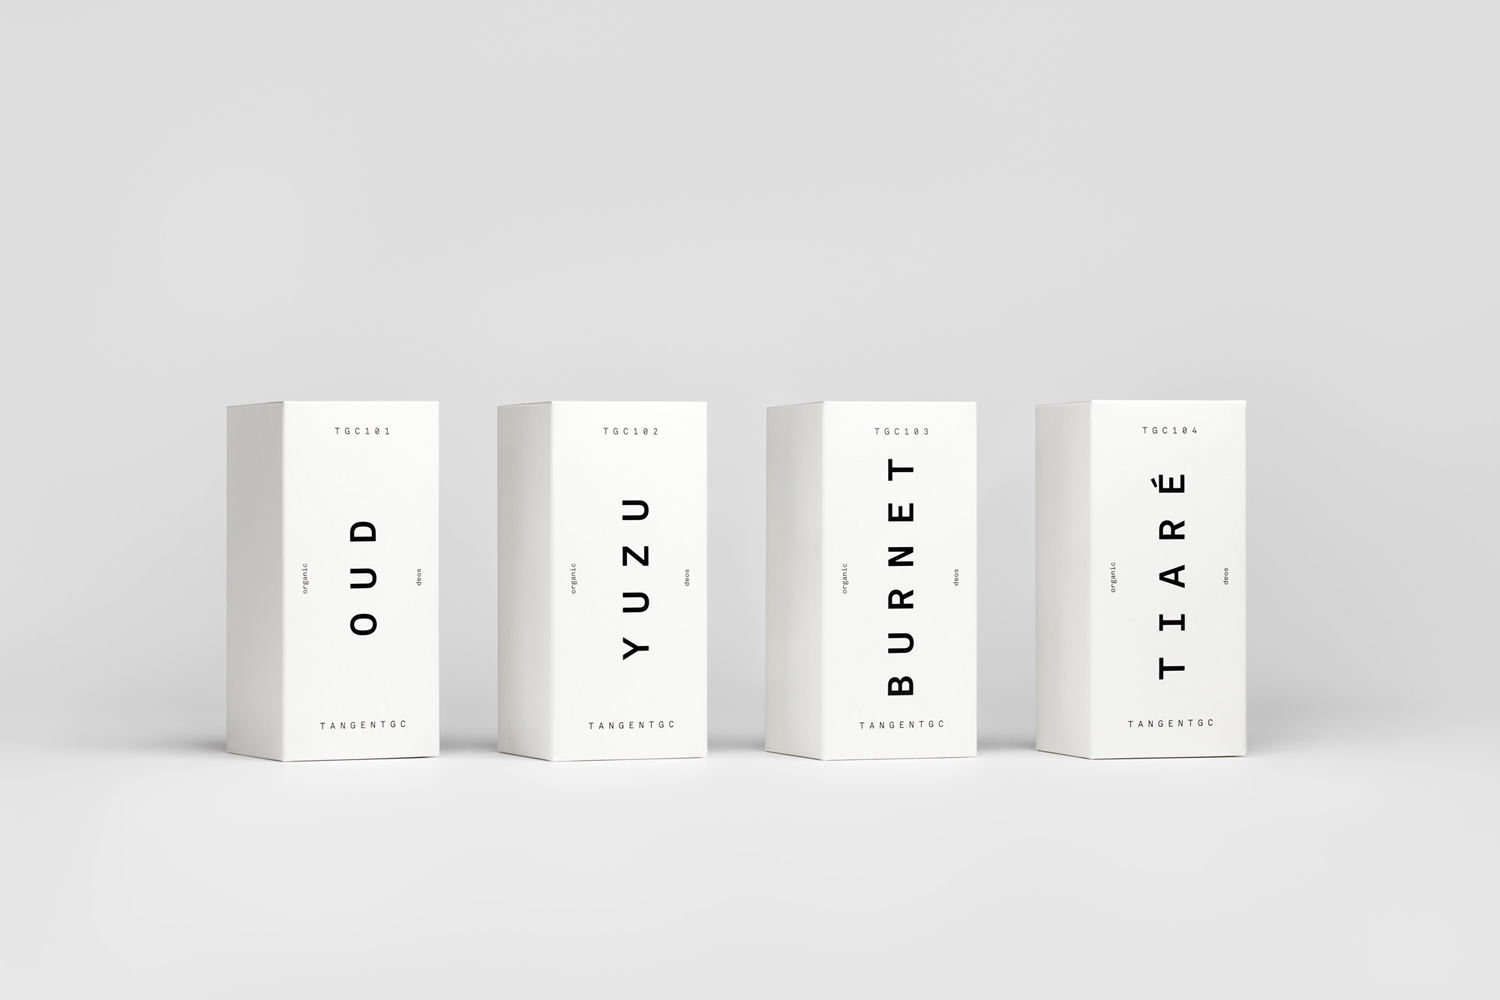 Black & White in Packaging – Tangent GC Soap by Carl Nas Associates, United Kingdom